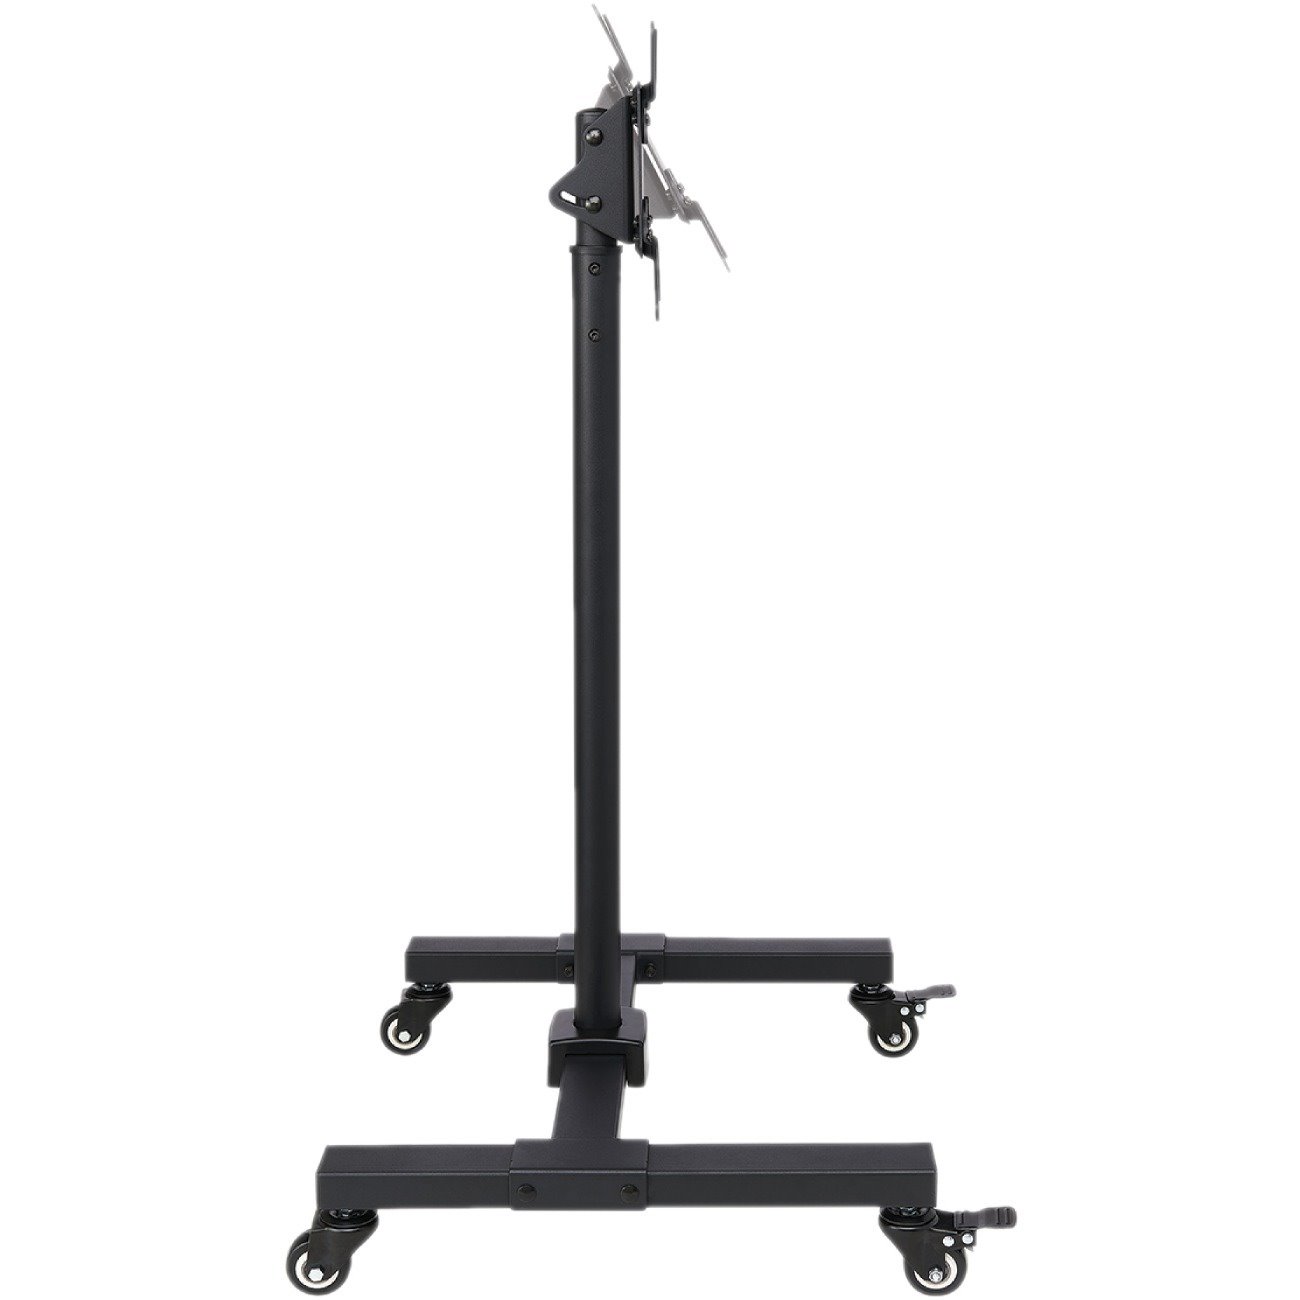 Eaton Tripp Lite Series Mobile TV Stand - Height Adjustable, 13" to 42" TVs and Monitors, Locking Casters, Black